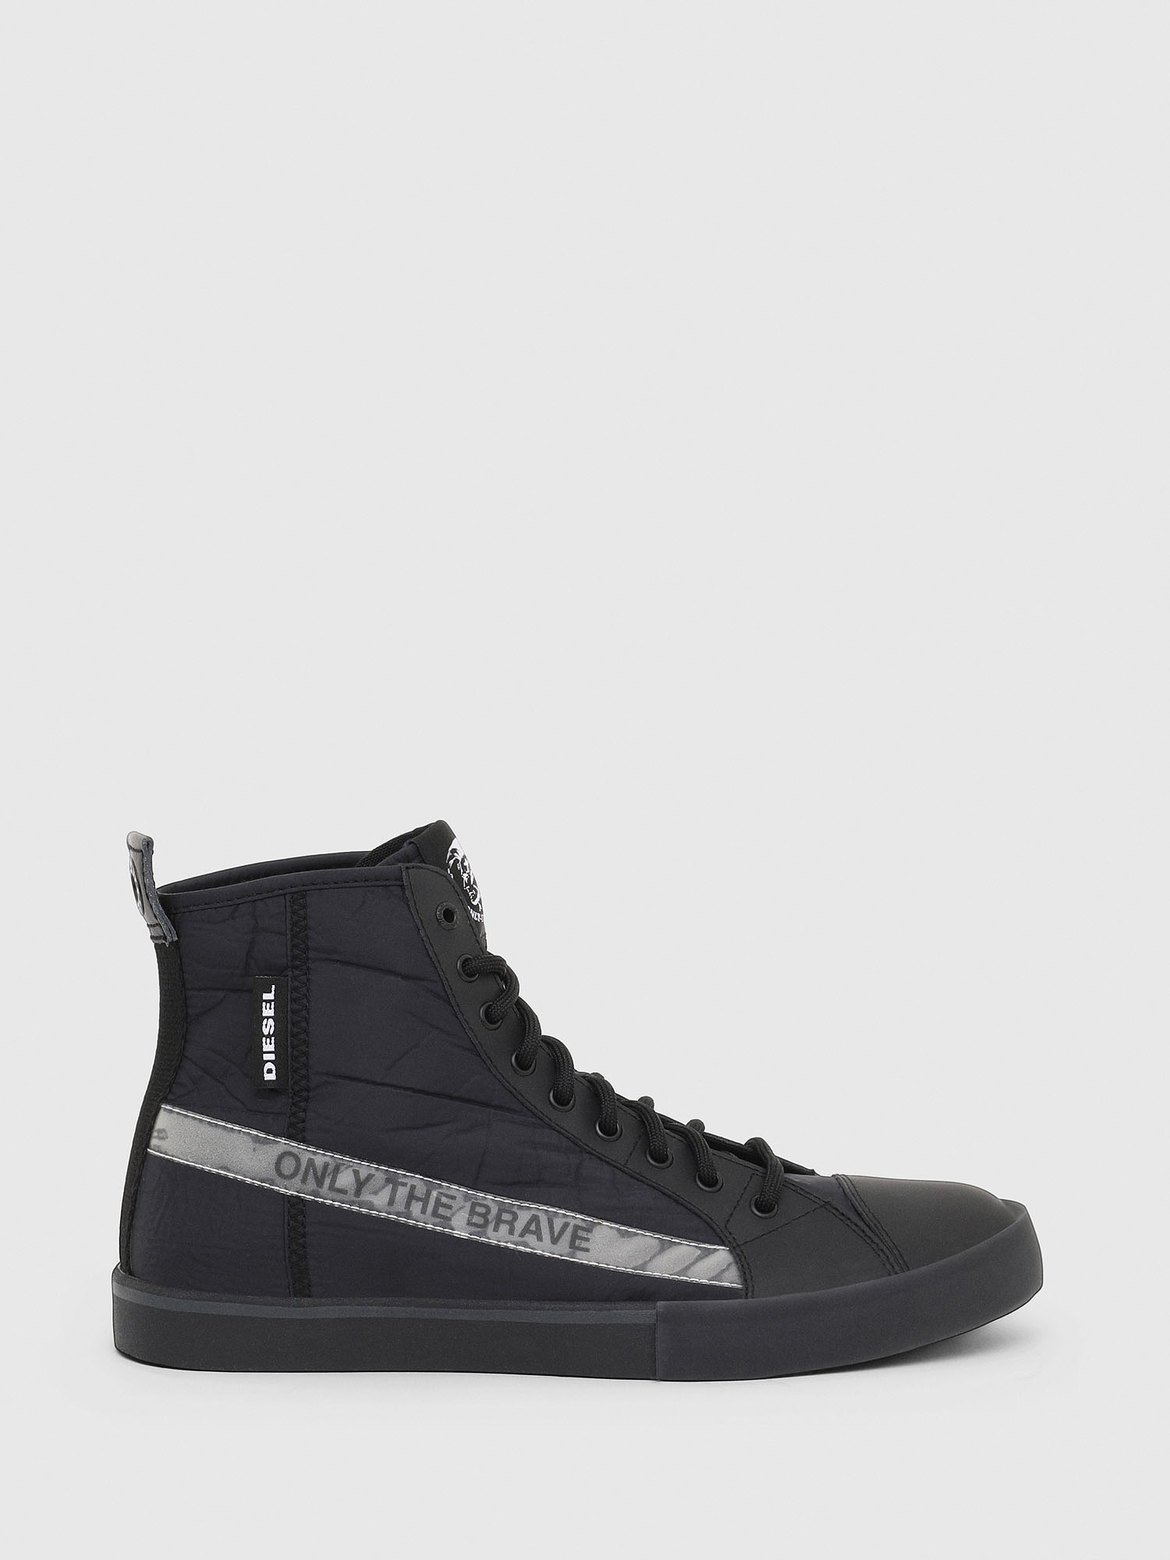 High-Top Sneakers In Nylon And Leather | Diesel